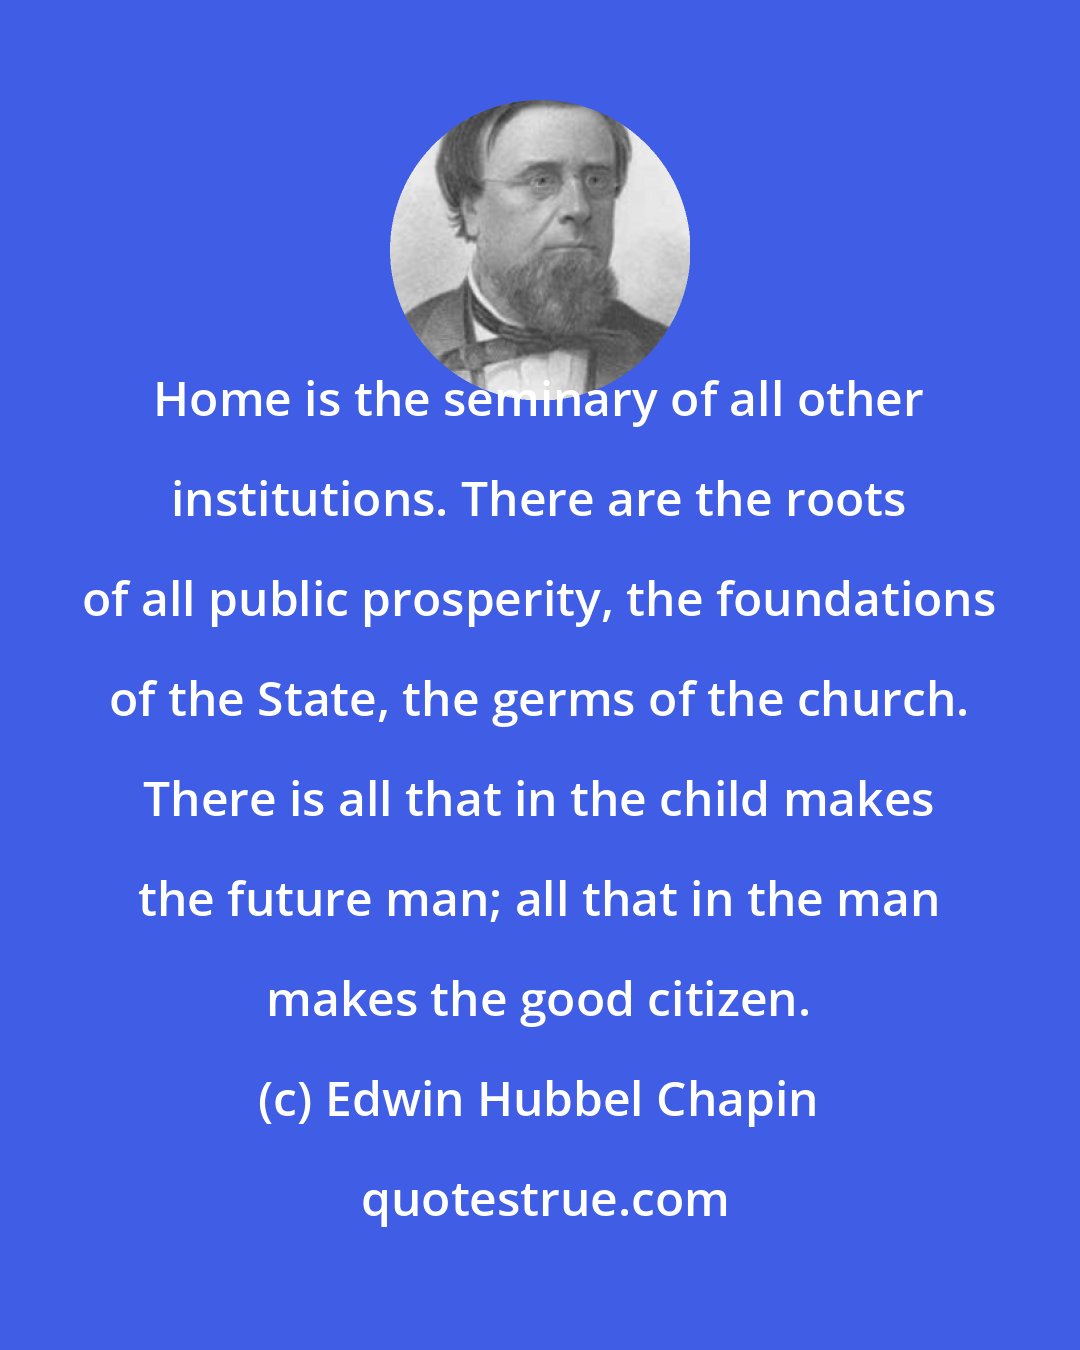 Edwin Hubbel Chapin: Home is the seminary of all other institutions. There are the roots of all public prosperity, the foundations of the State, the germs of the church. There is all that in the child makes the future man; all that in the man makes the good citizen.